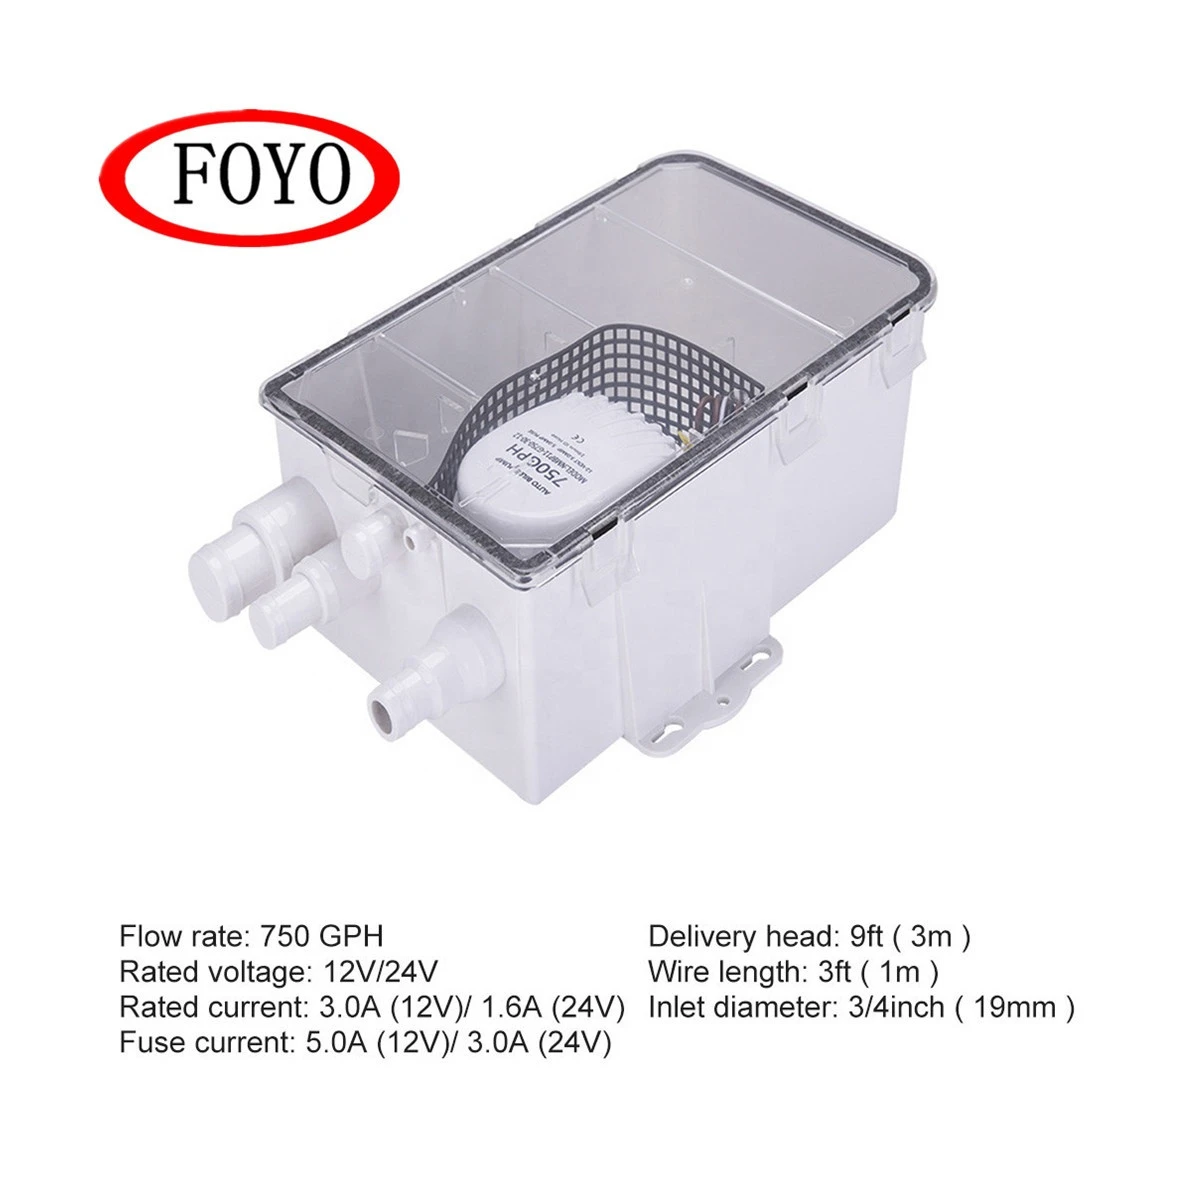 Foyo Brand Hot Sale Marine 24V 600 GPH Shower Sump Pump Drain Kit System for Boat and Sailboat